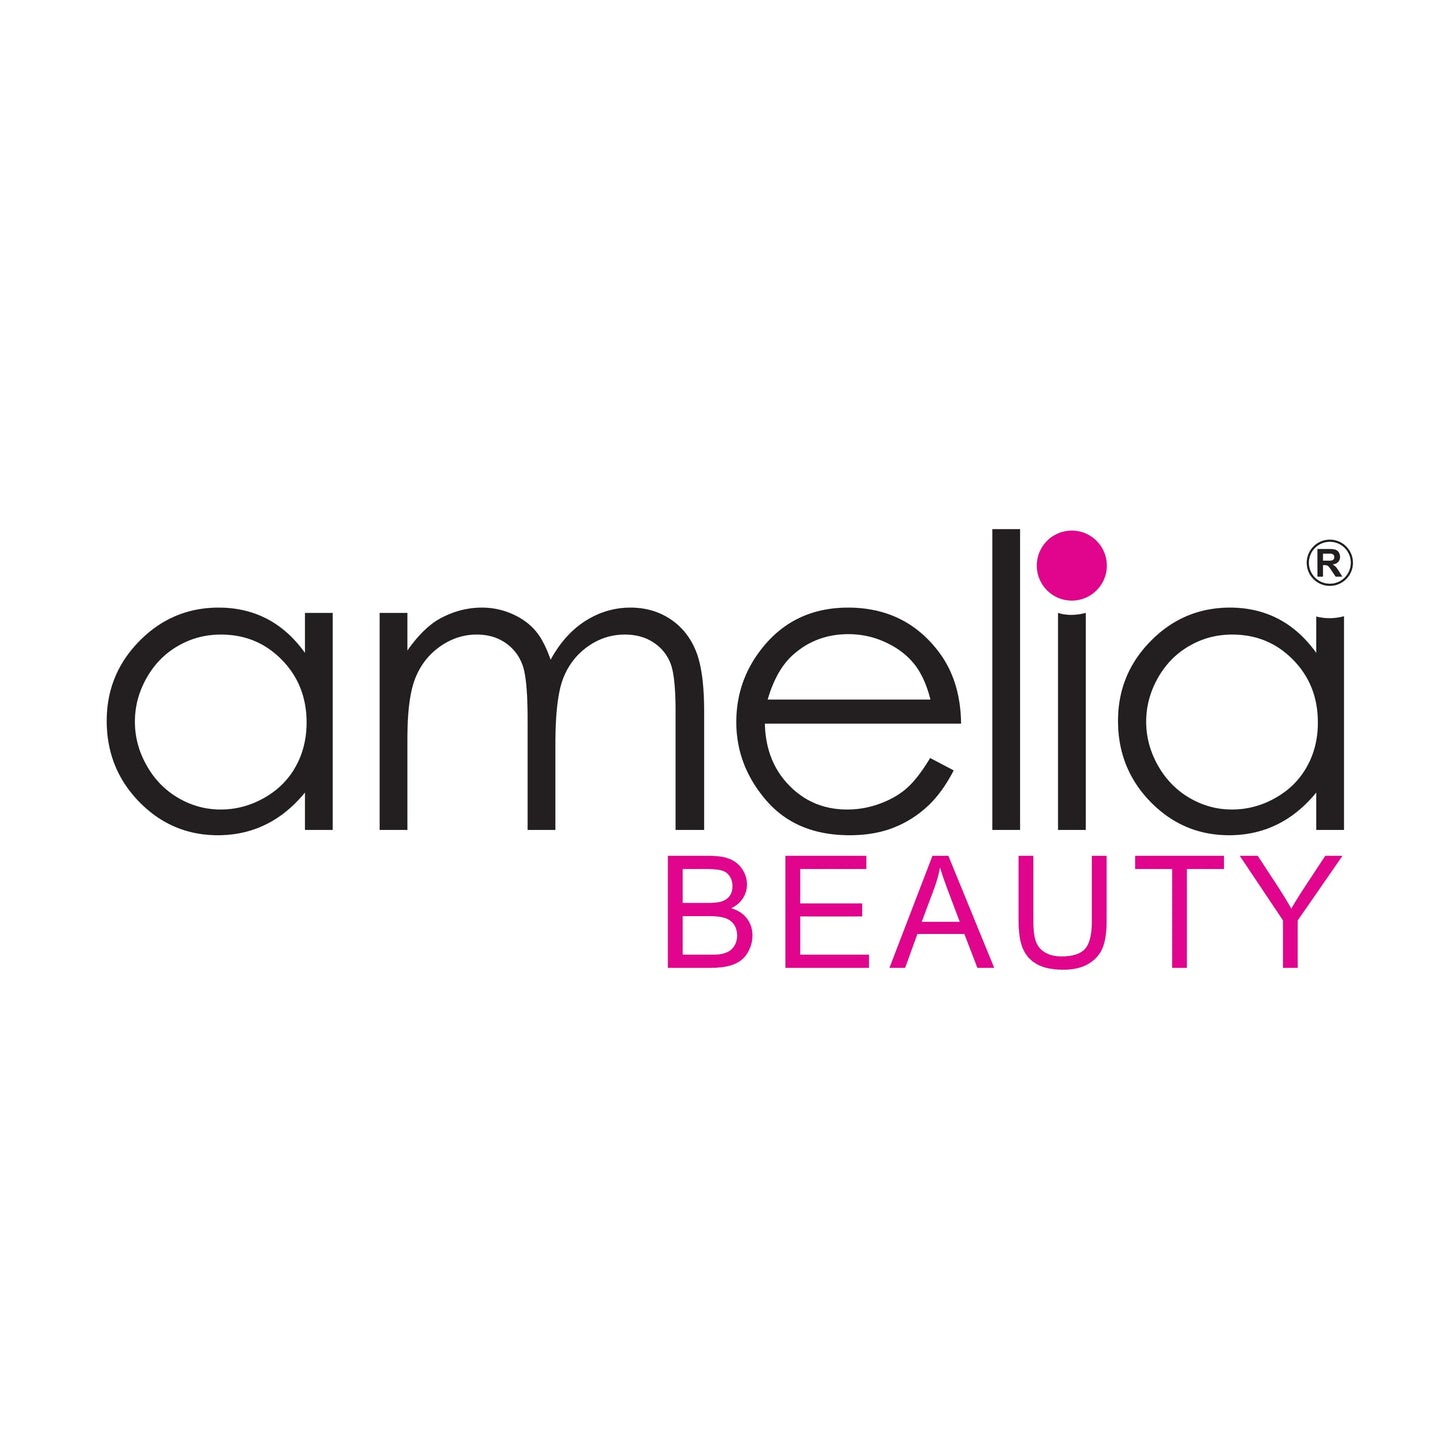 Amelia Beauty Products 8 Medium Smooth Elastic Mutli-Colored Hair Coils, 2.25in Diameter Spiral Hair Ties, Gentle Yet Strong Hold and Minimizes Dents, Pink/Blue